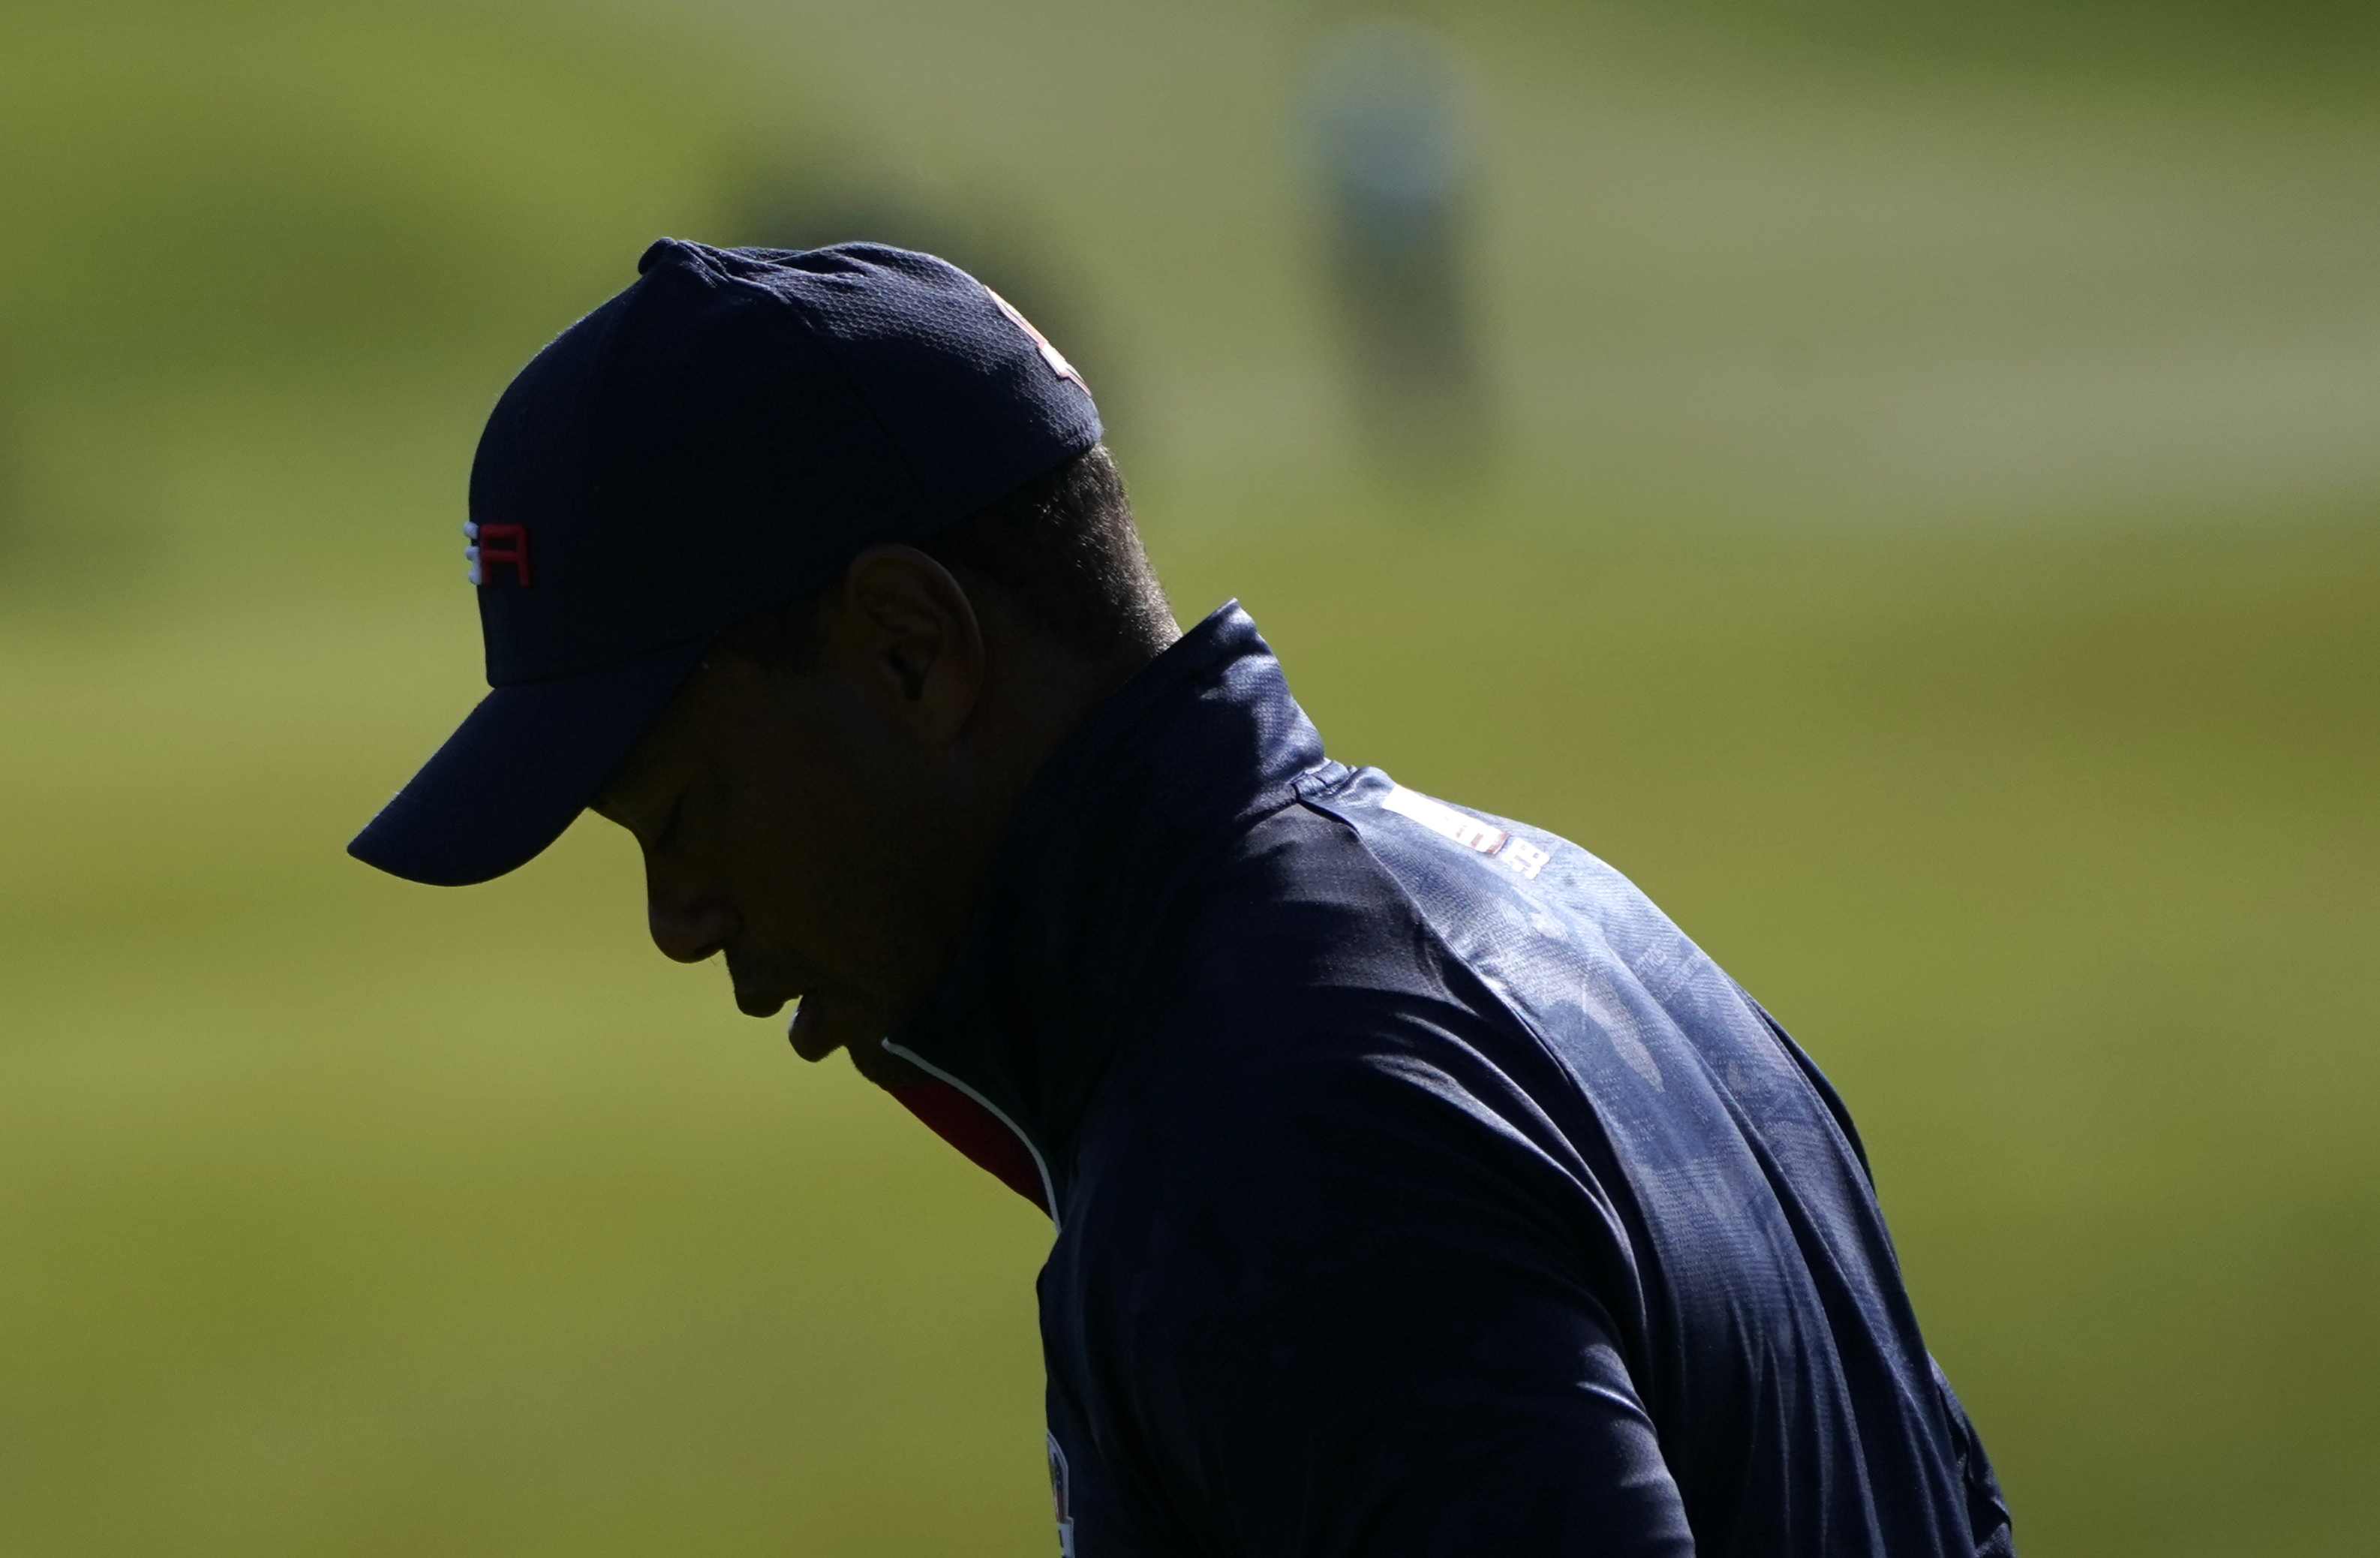 Tiger Woods looks in a lot of pain as he loses Ryder Cup match again